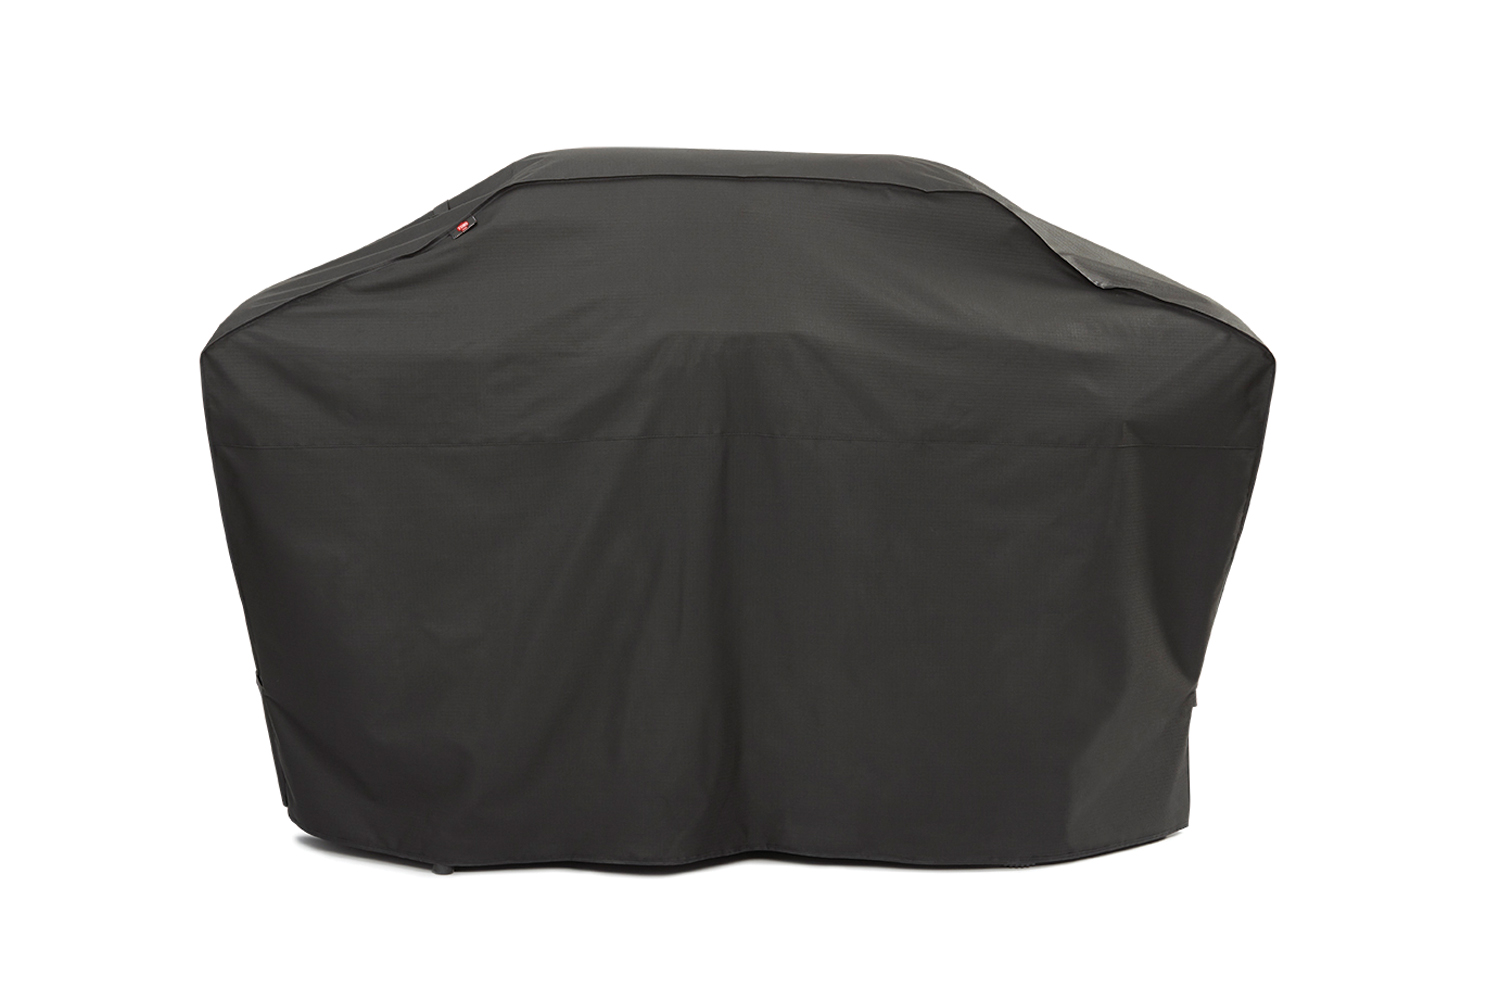 Expert Grill Heavy Duty 5-6 Burner Gas Grill Cover - image 1 of 10